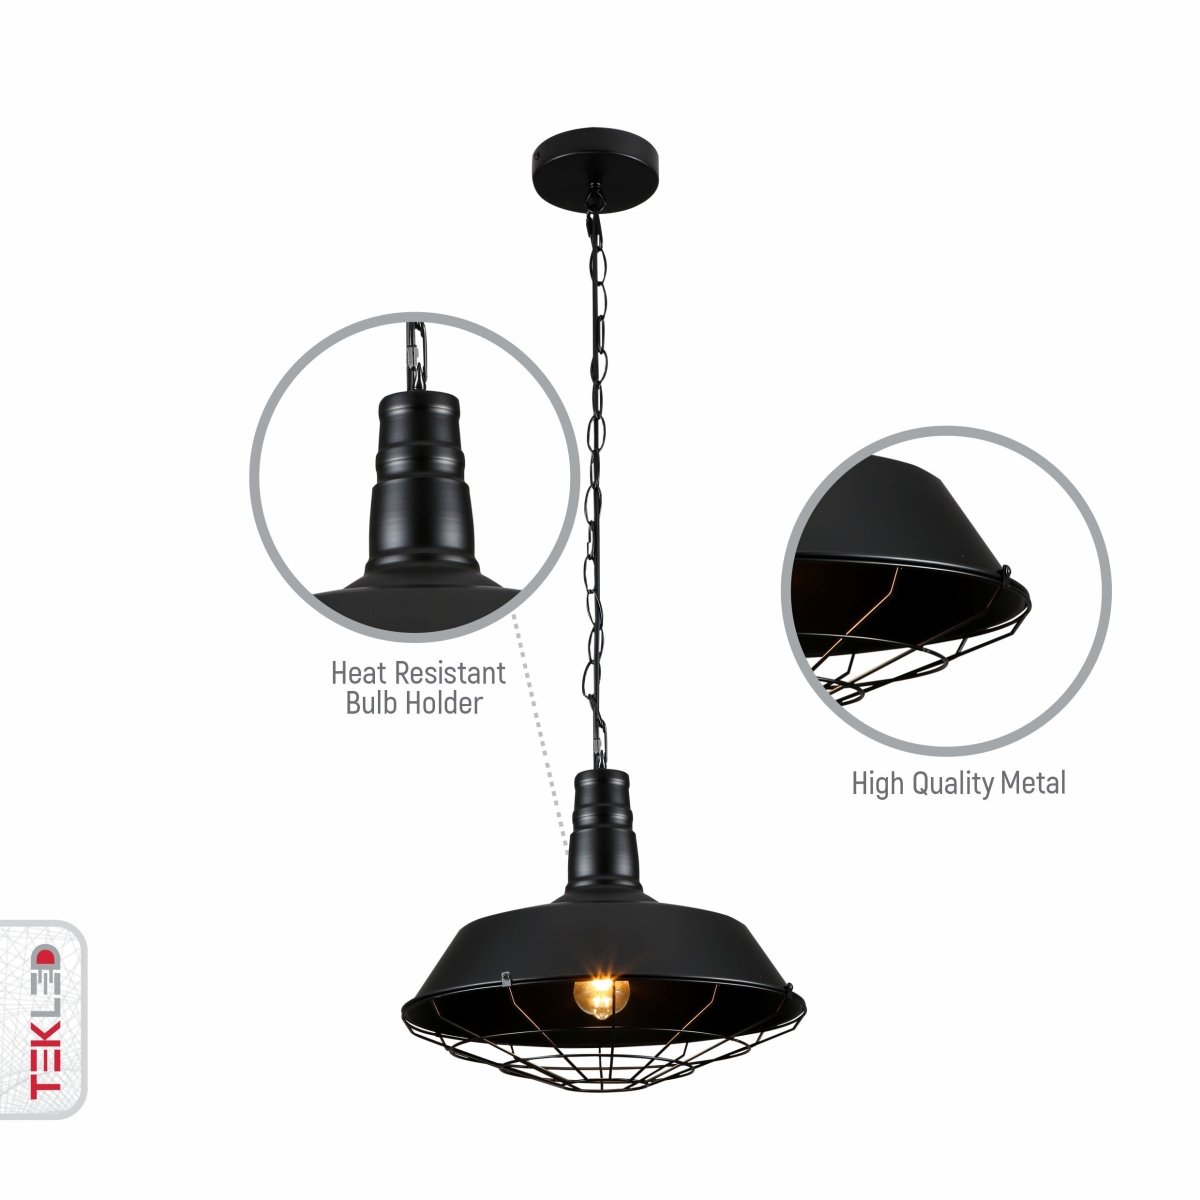 Close up shots of Black Step Caged Industrial Metal Ceiling Pendant Light with E27 Fitting | TEKLED 150-18362